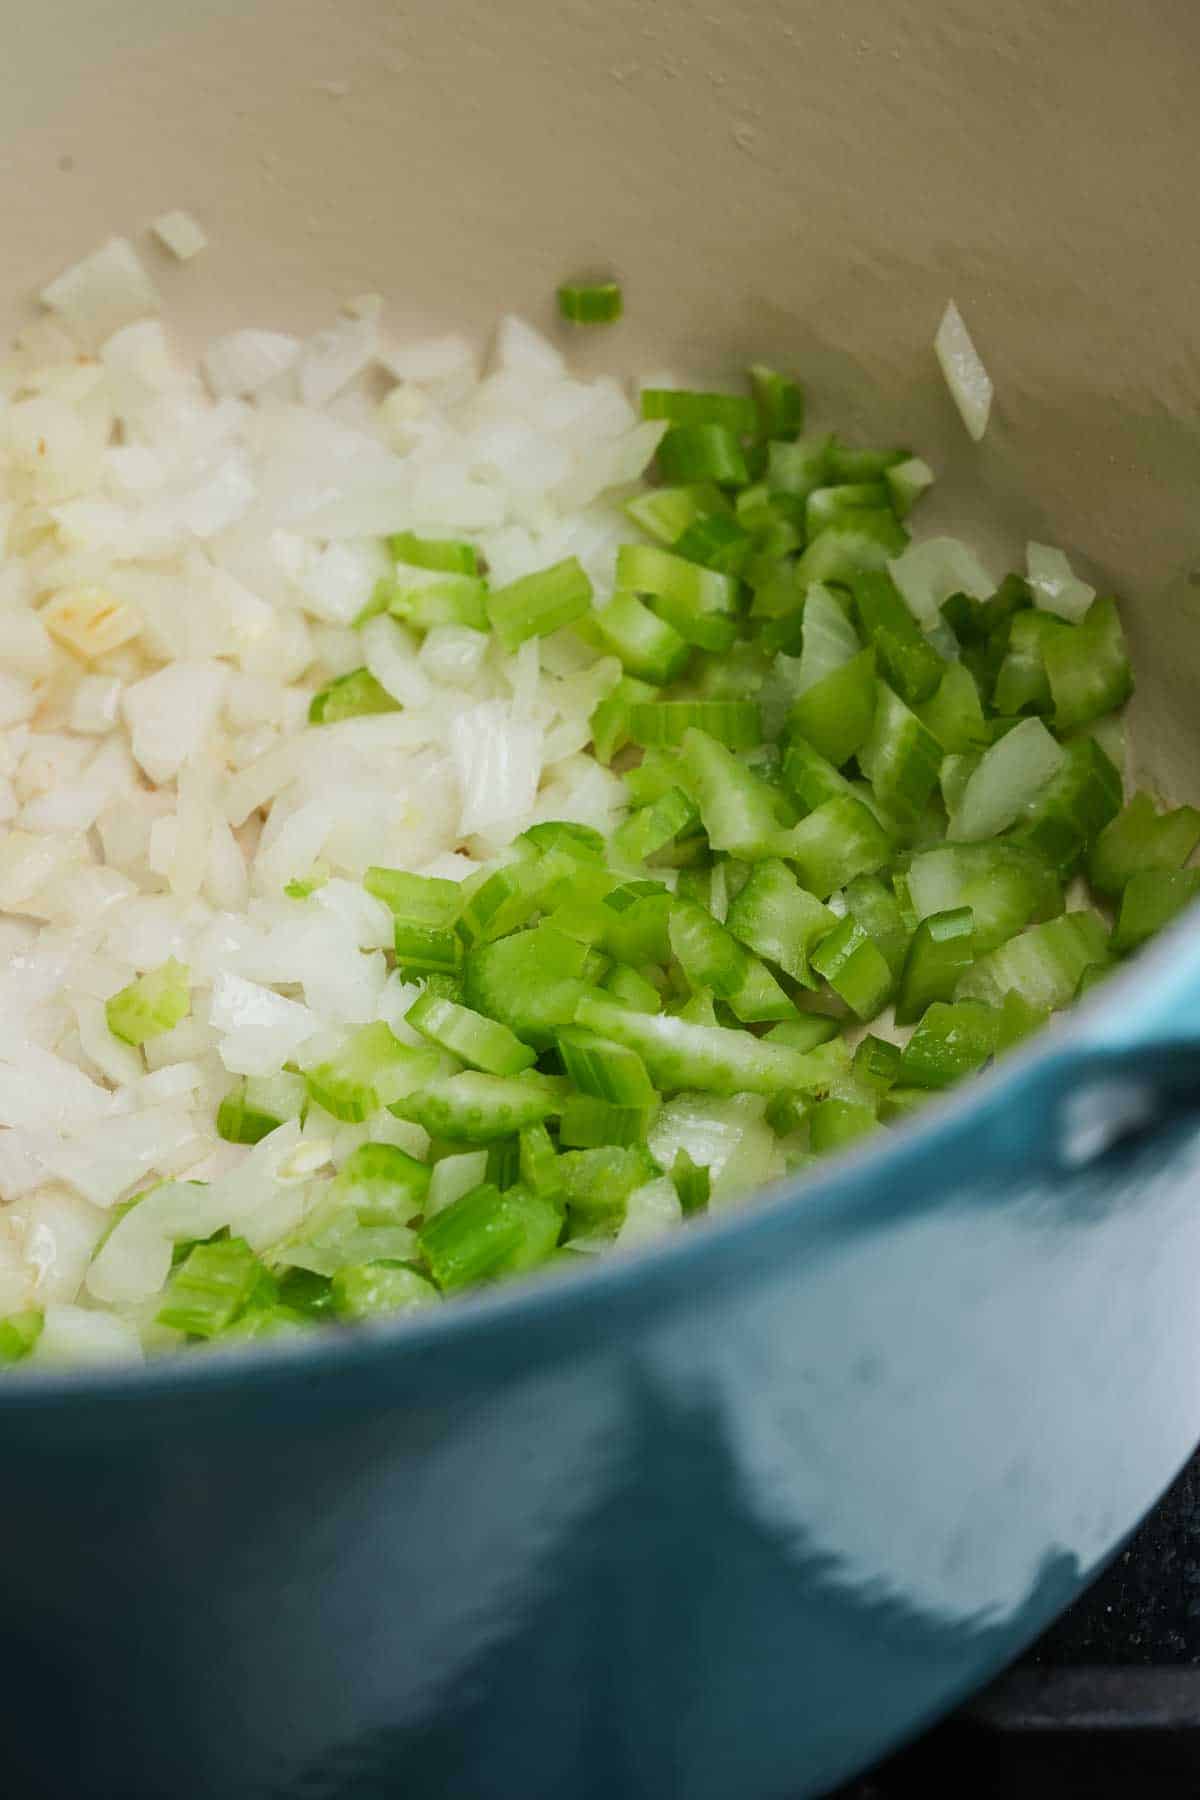 Onions and celery cooking in a pot on a stove.